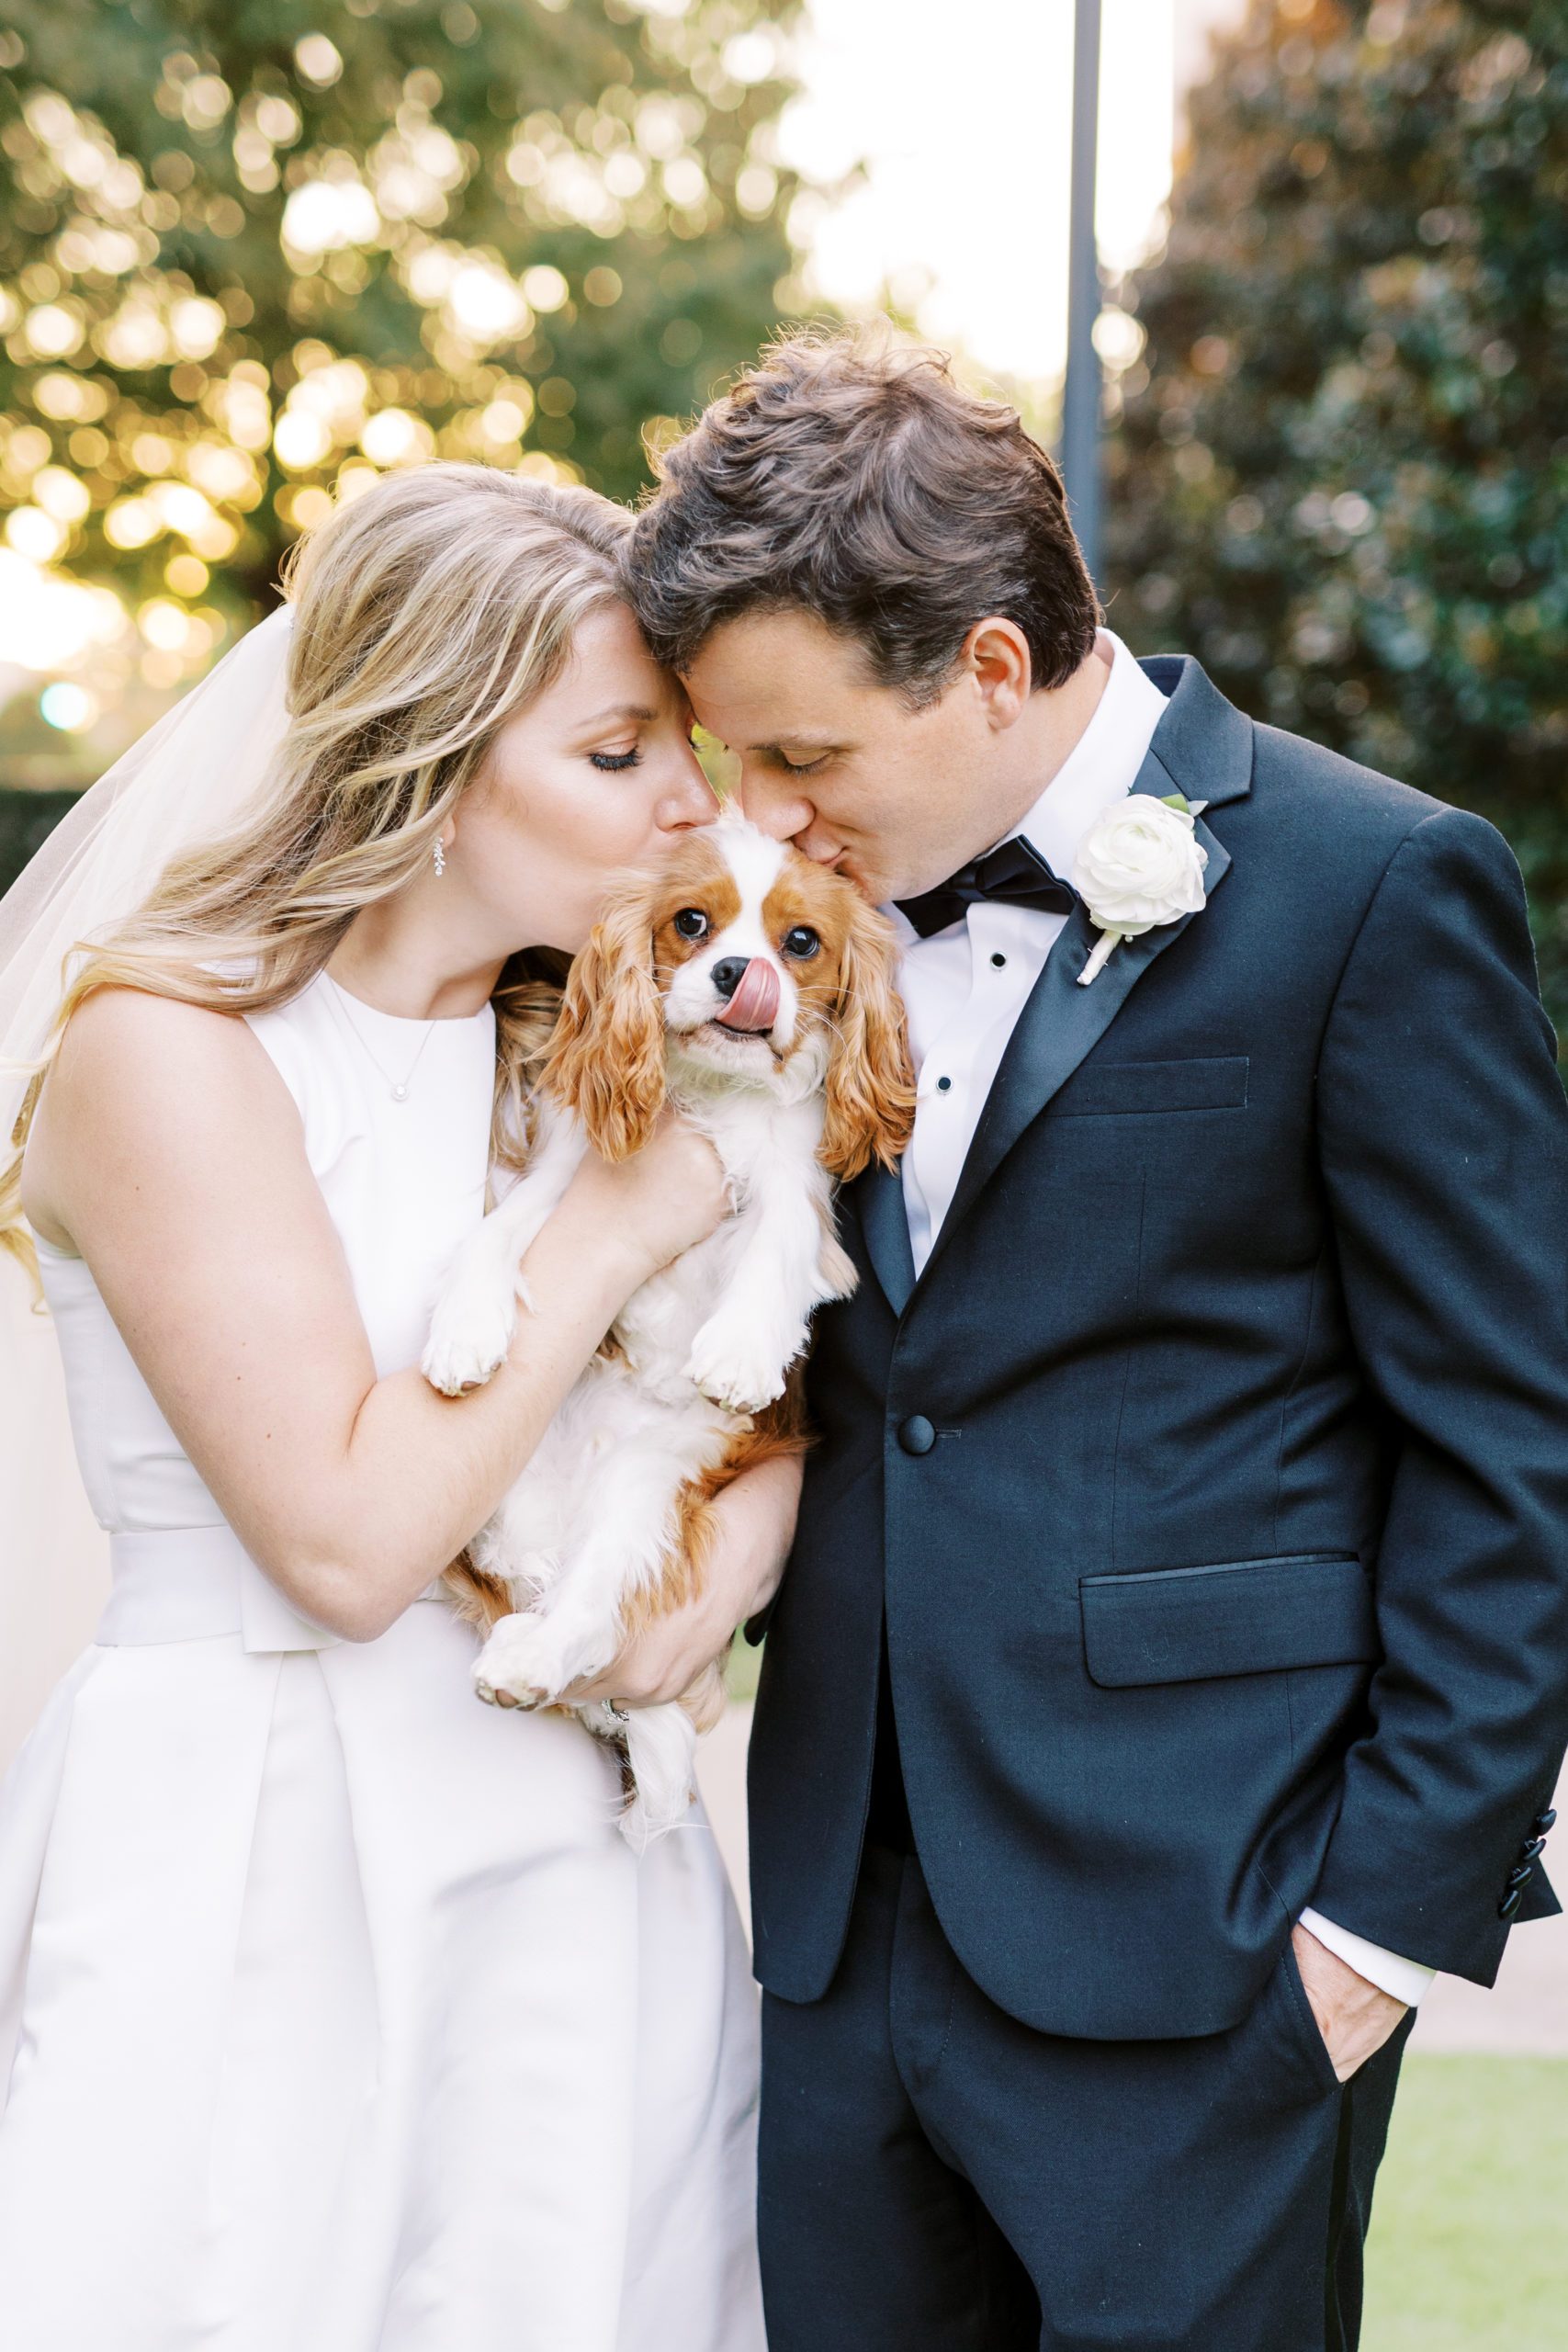 Bride and Groom included their puppy in the wedding!